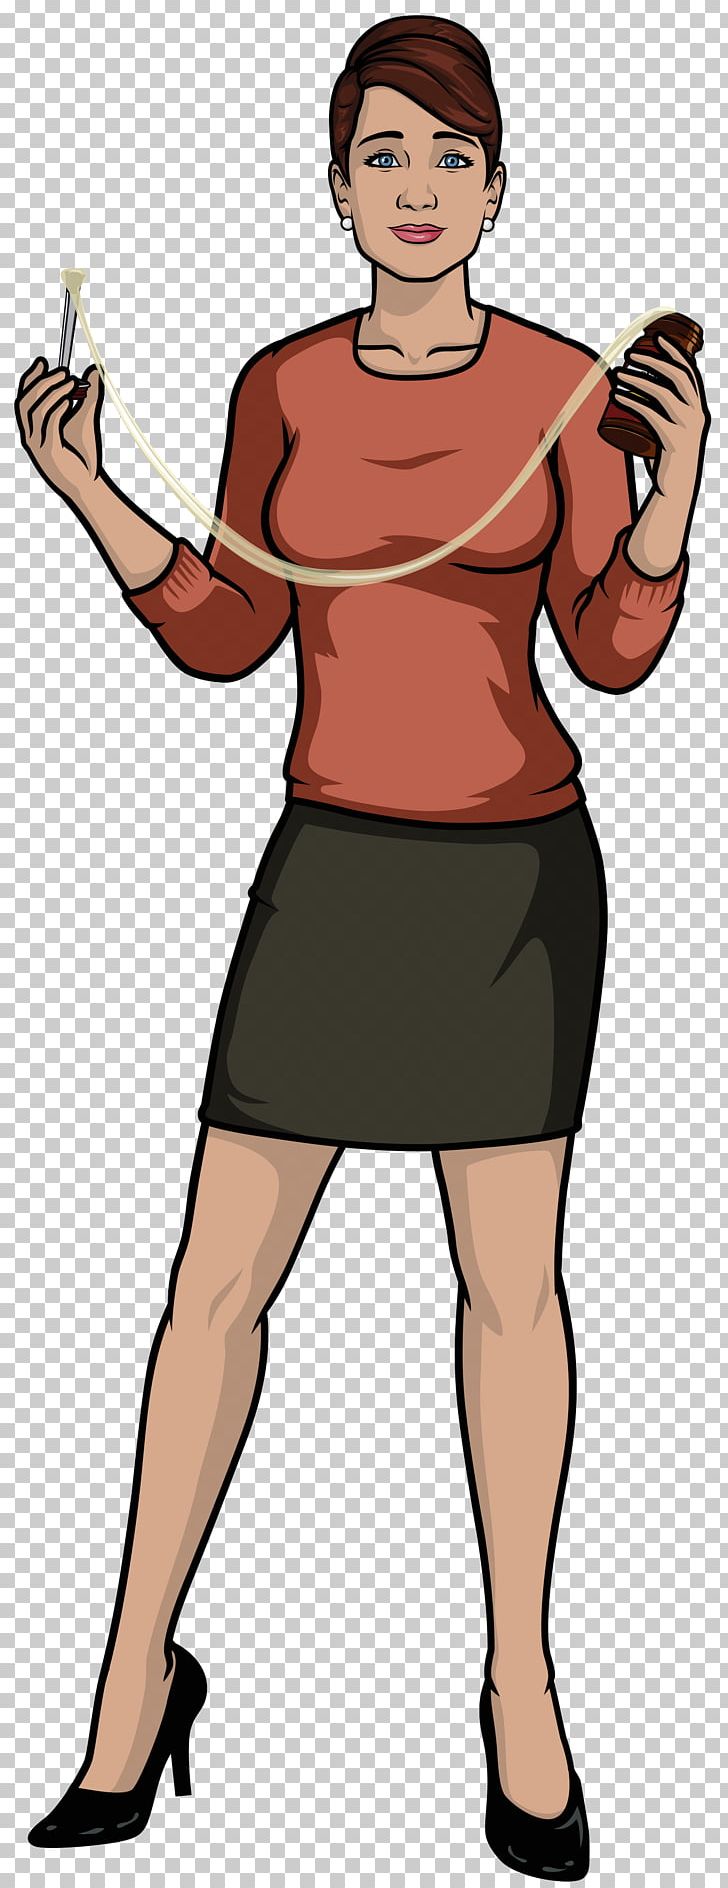 Sterling Archer Cheryl Tunt Judy Greer Lana Anthony Kane PNG, Clipart, Abdomen, Adam Reed, Amber Nash, Archer, Archer Season 5 Free PNG Download